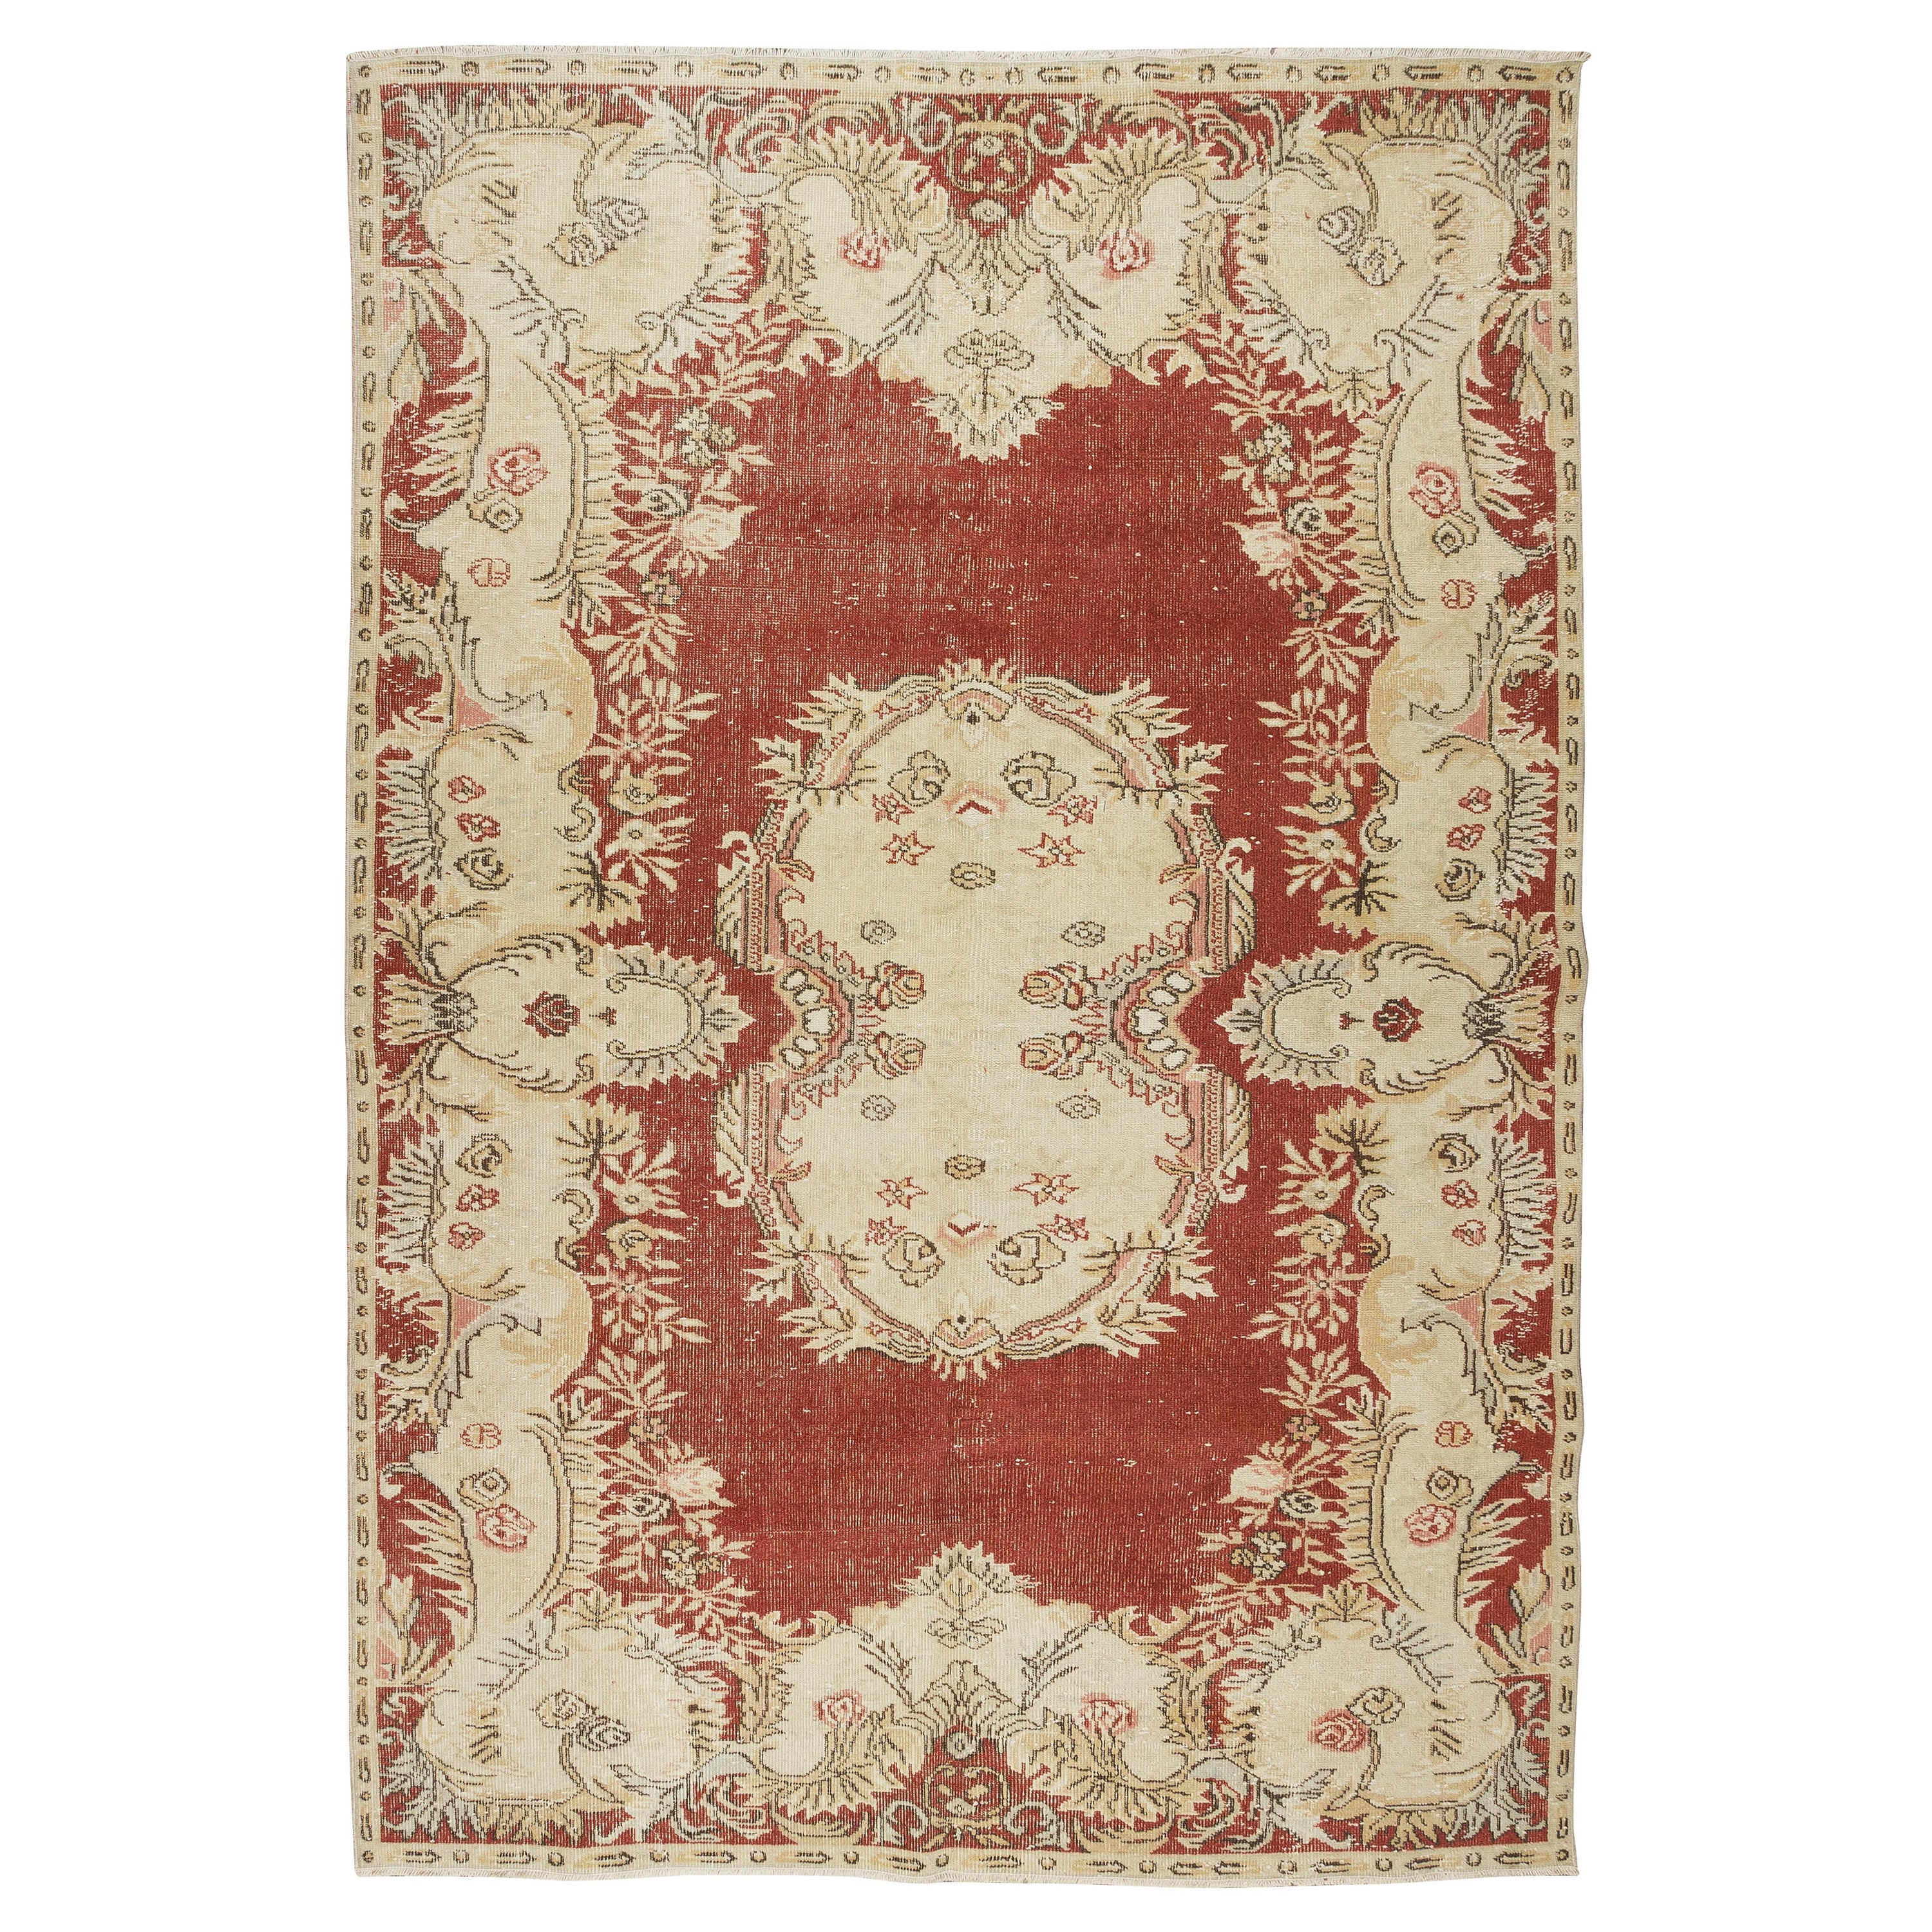 6.3x10 ft One-of-a-kind Vintage Handmade Anatolian Area Rug in Red & Beige For Sale